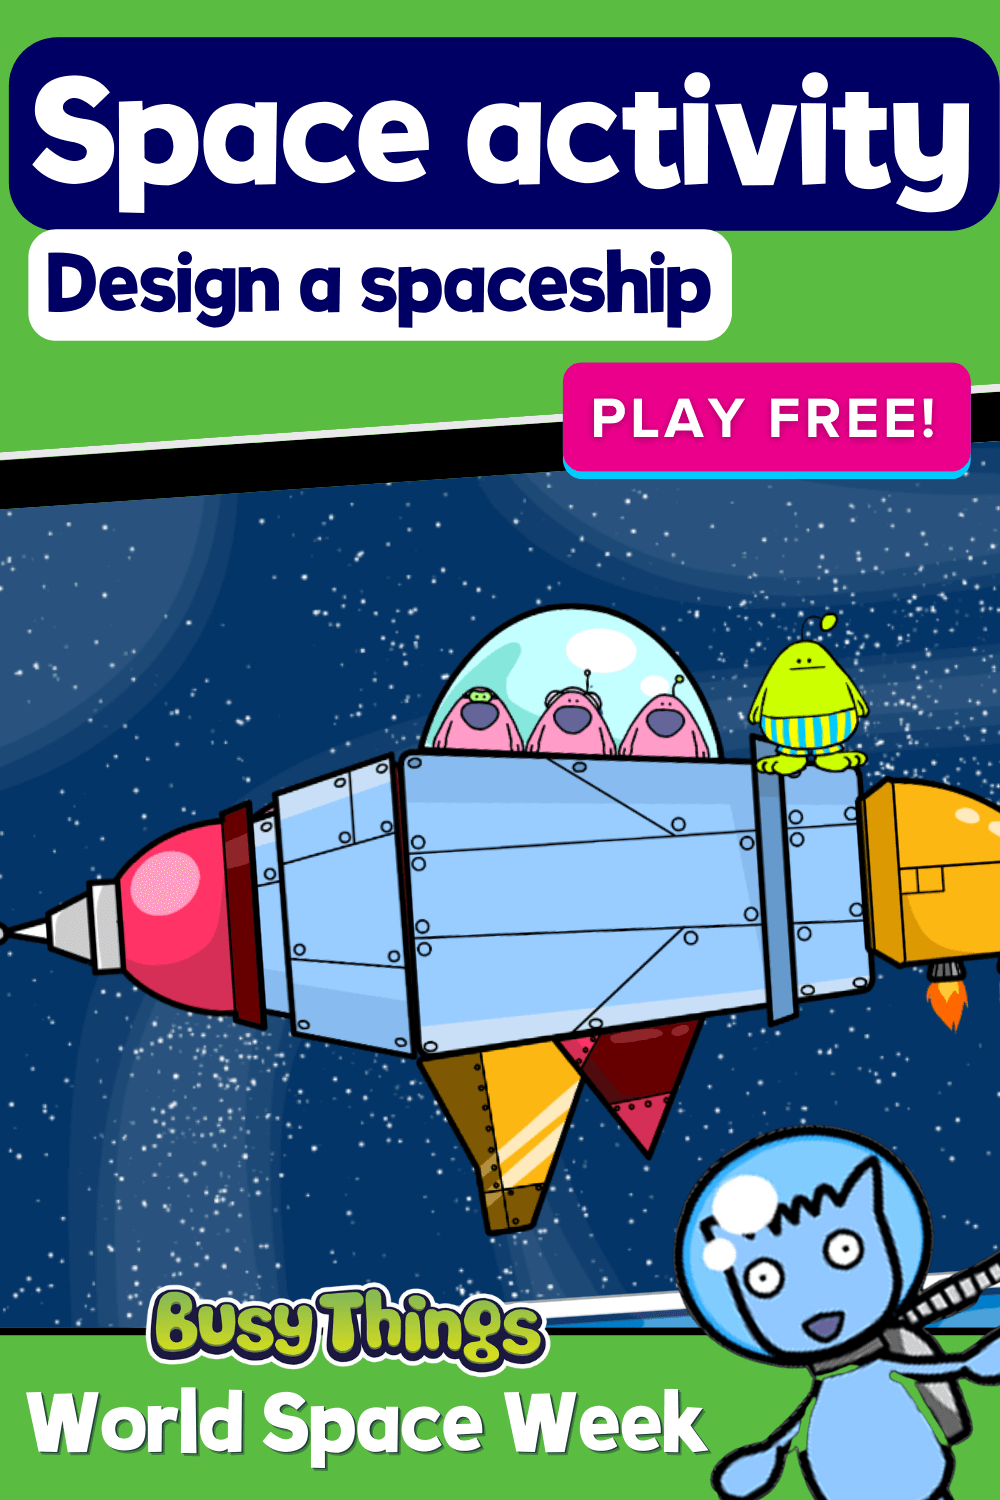 Space activity for kids: design a spaceship